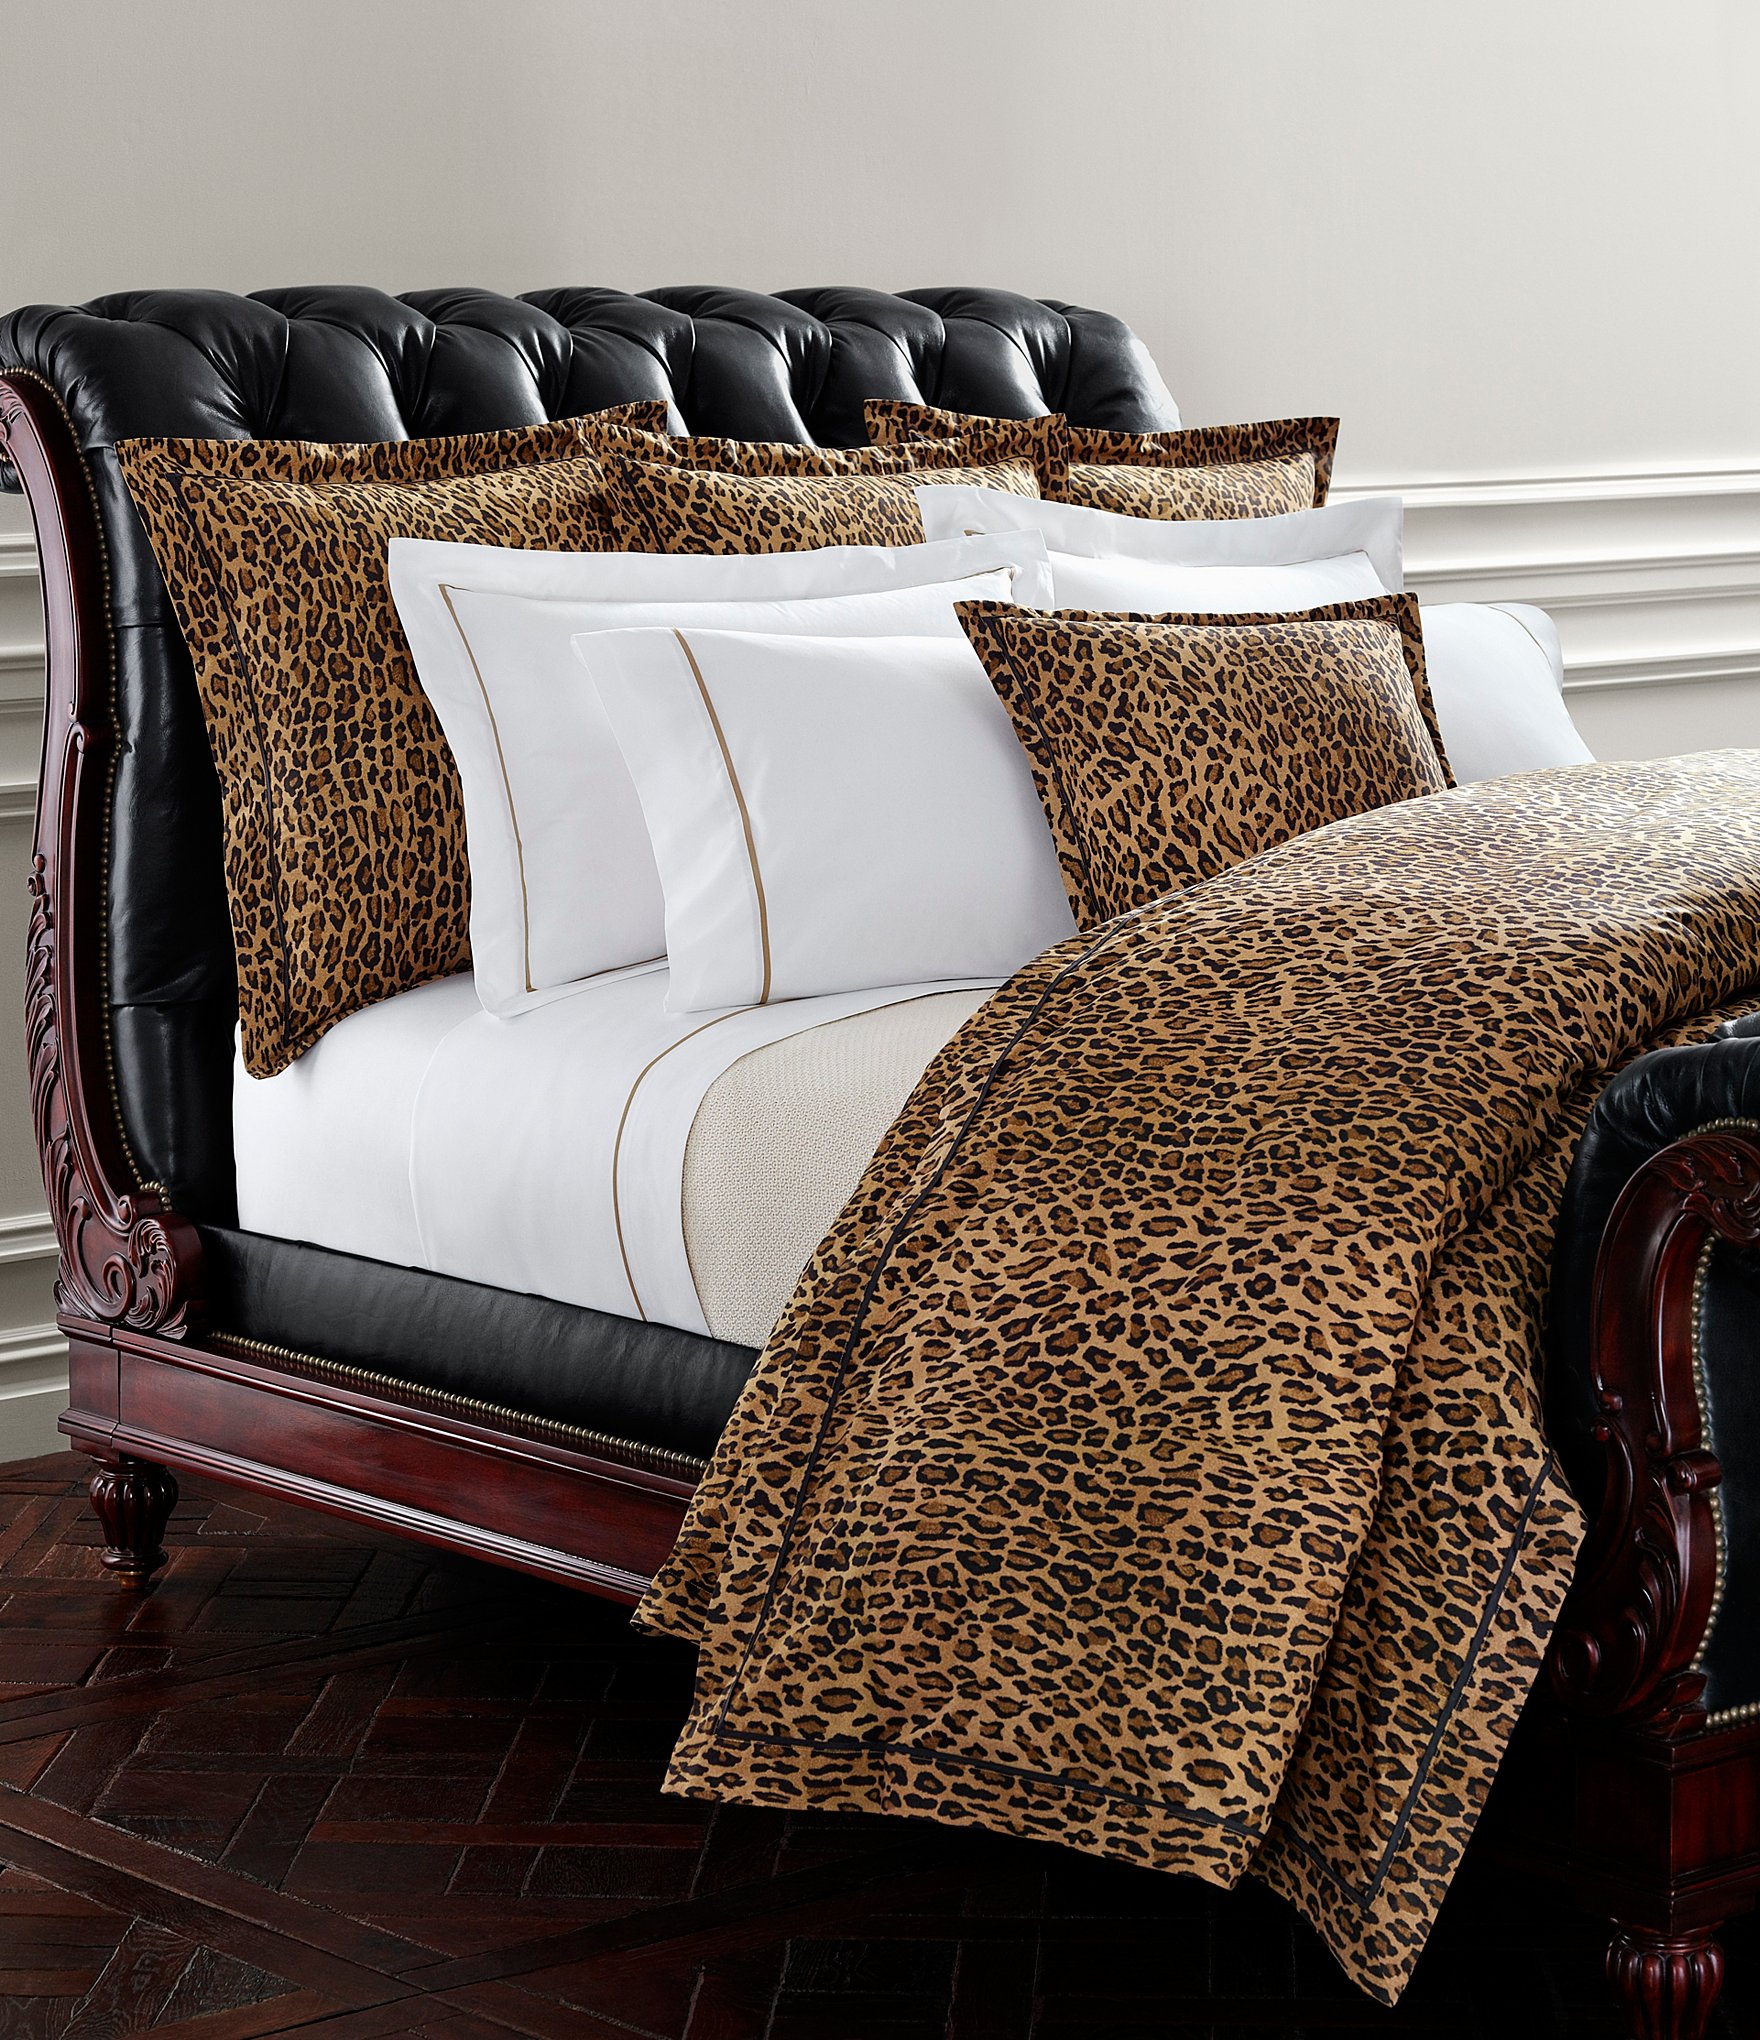 Who Outlook carve ralph lauren animal print bedding Reduction Instantly ...